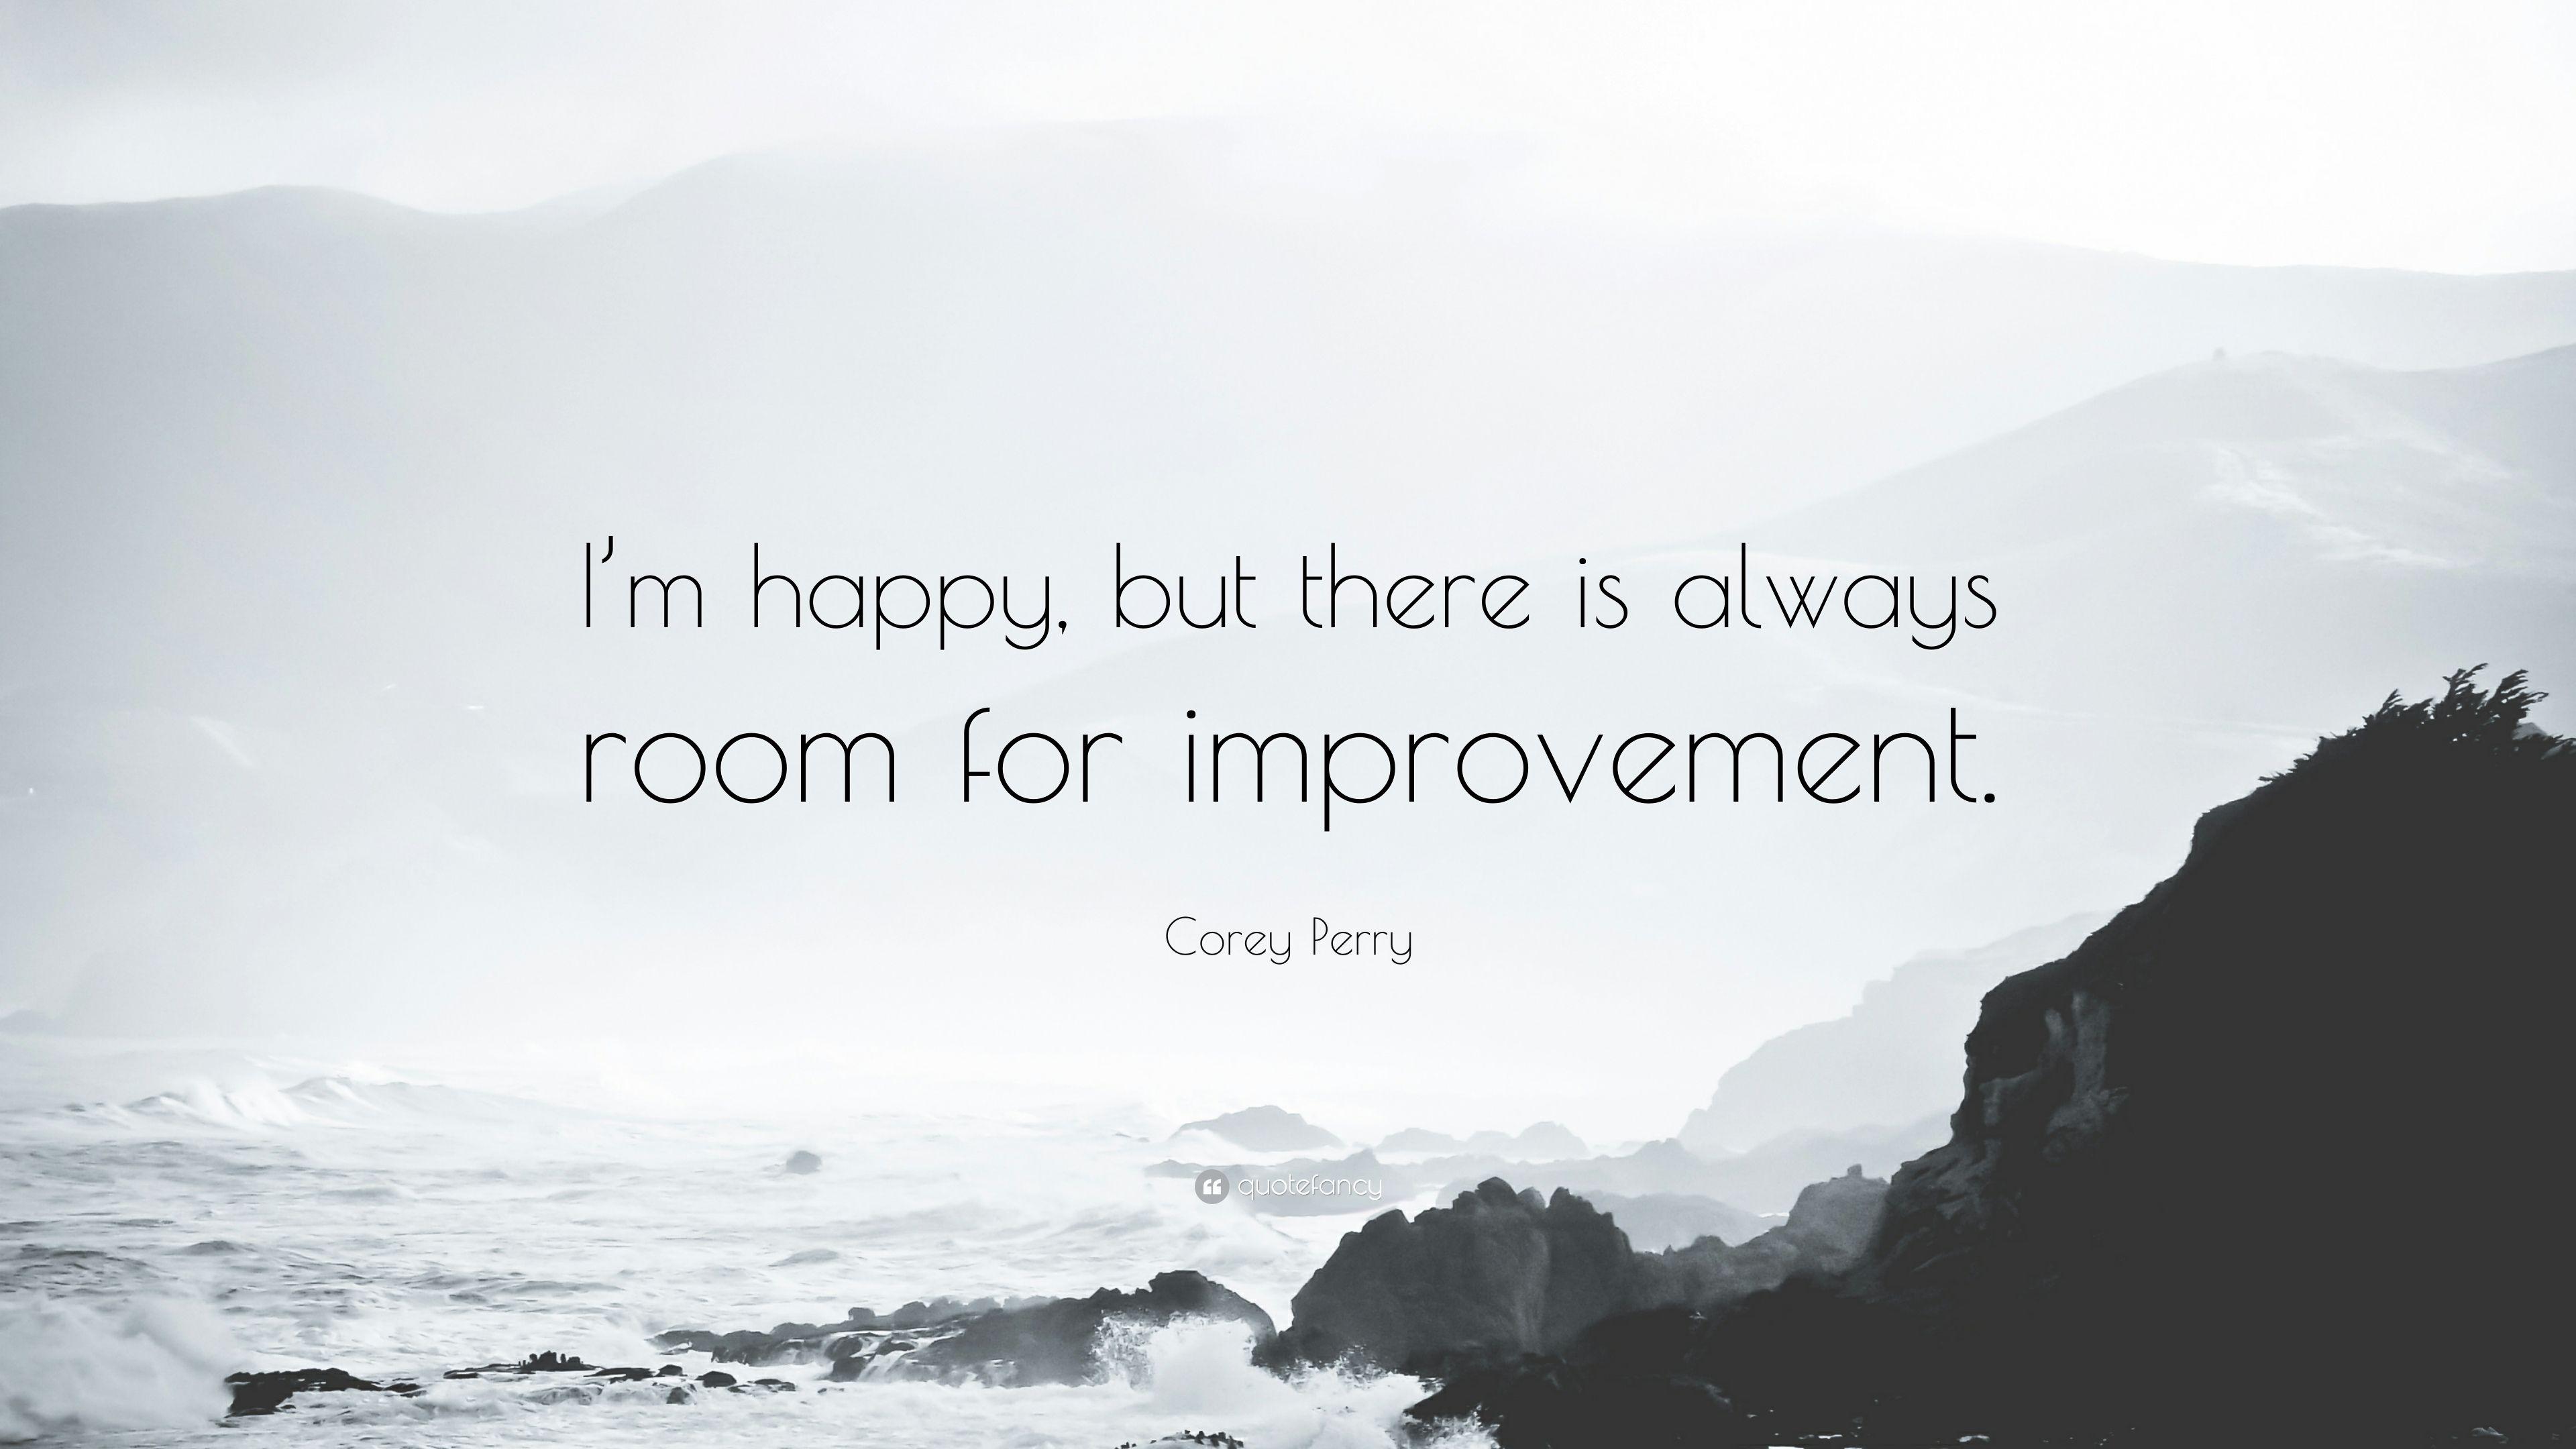 Corey Perry Quote: “I'm happy, but there is always room